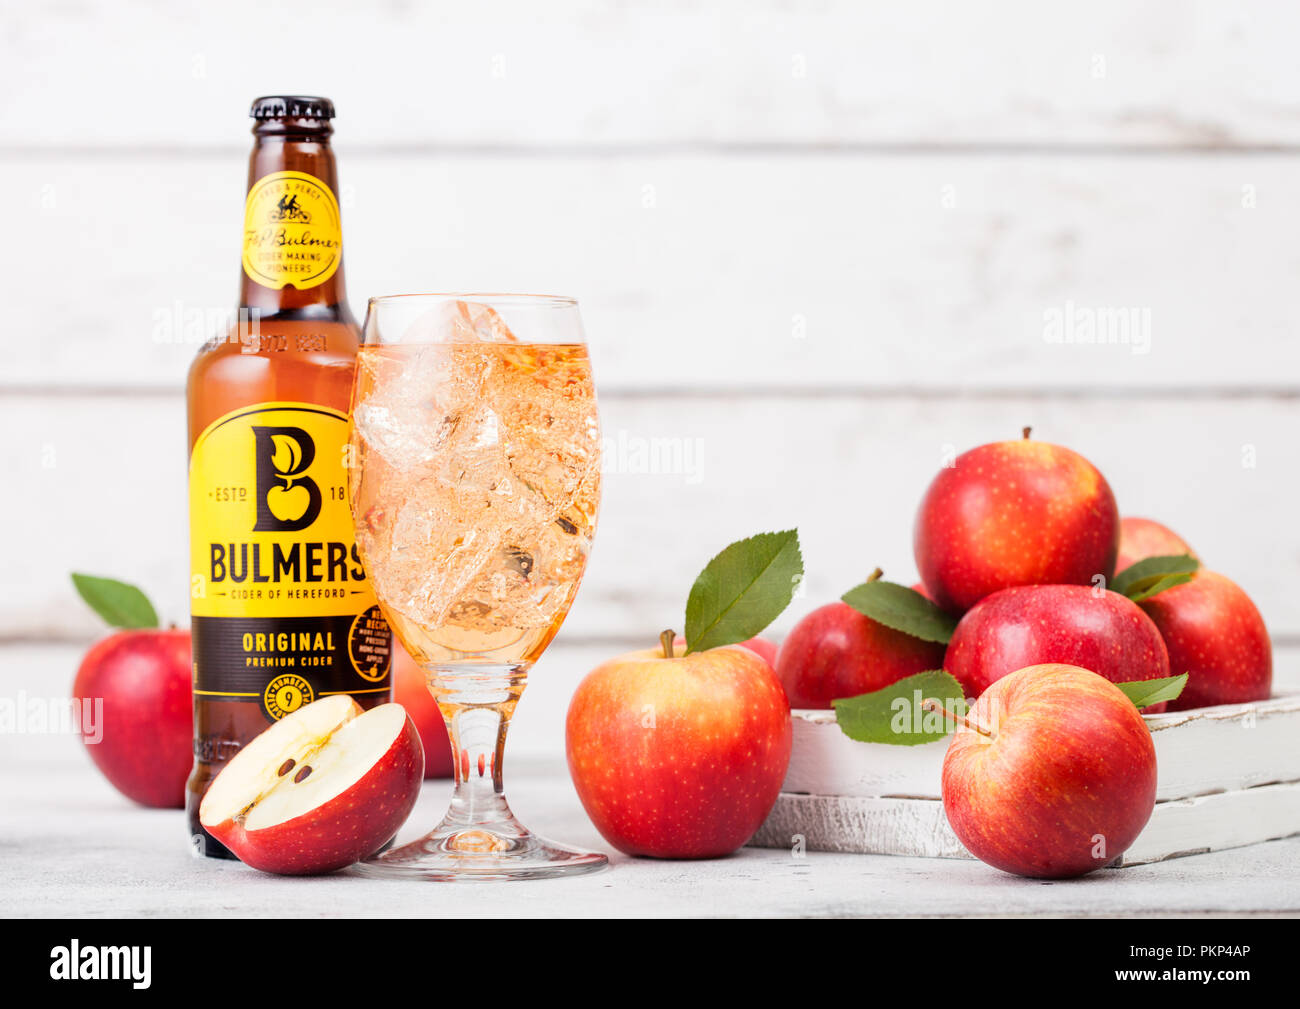 LONDON, UK - SEPTEMBER 13, 2018: Bottle of Bulmers Original Cider and glass of ice cubes with fresh apples on wood background. Stock Photo